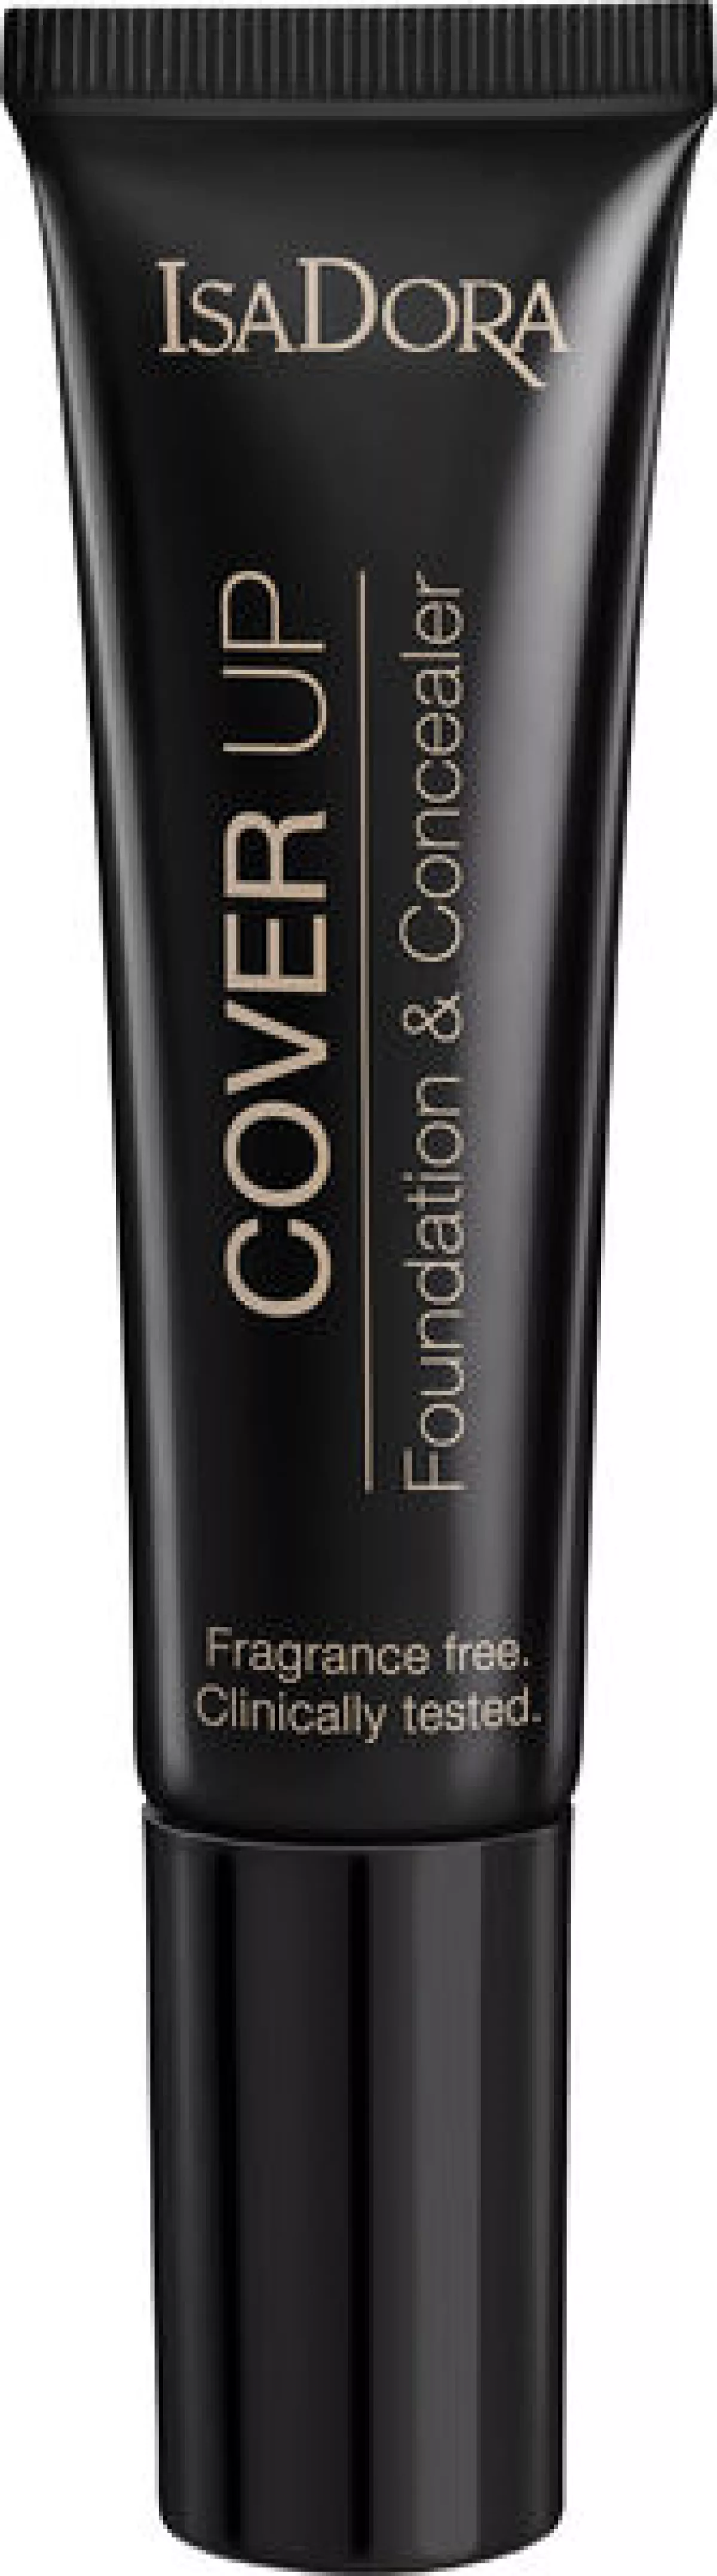 #2 - IsaDora Cover Up Foundation & Concealer - 69 Toffee Cover